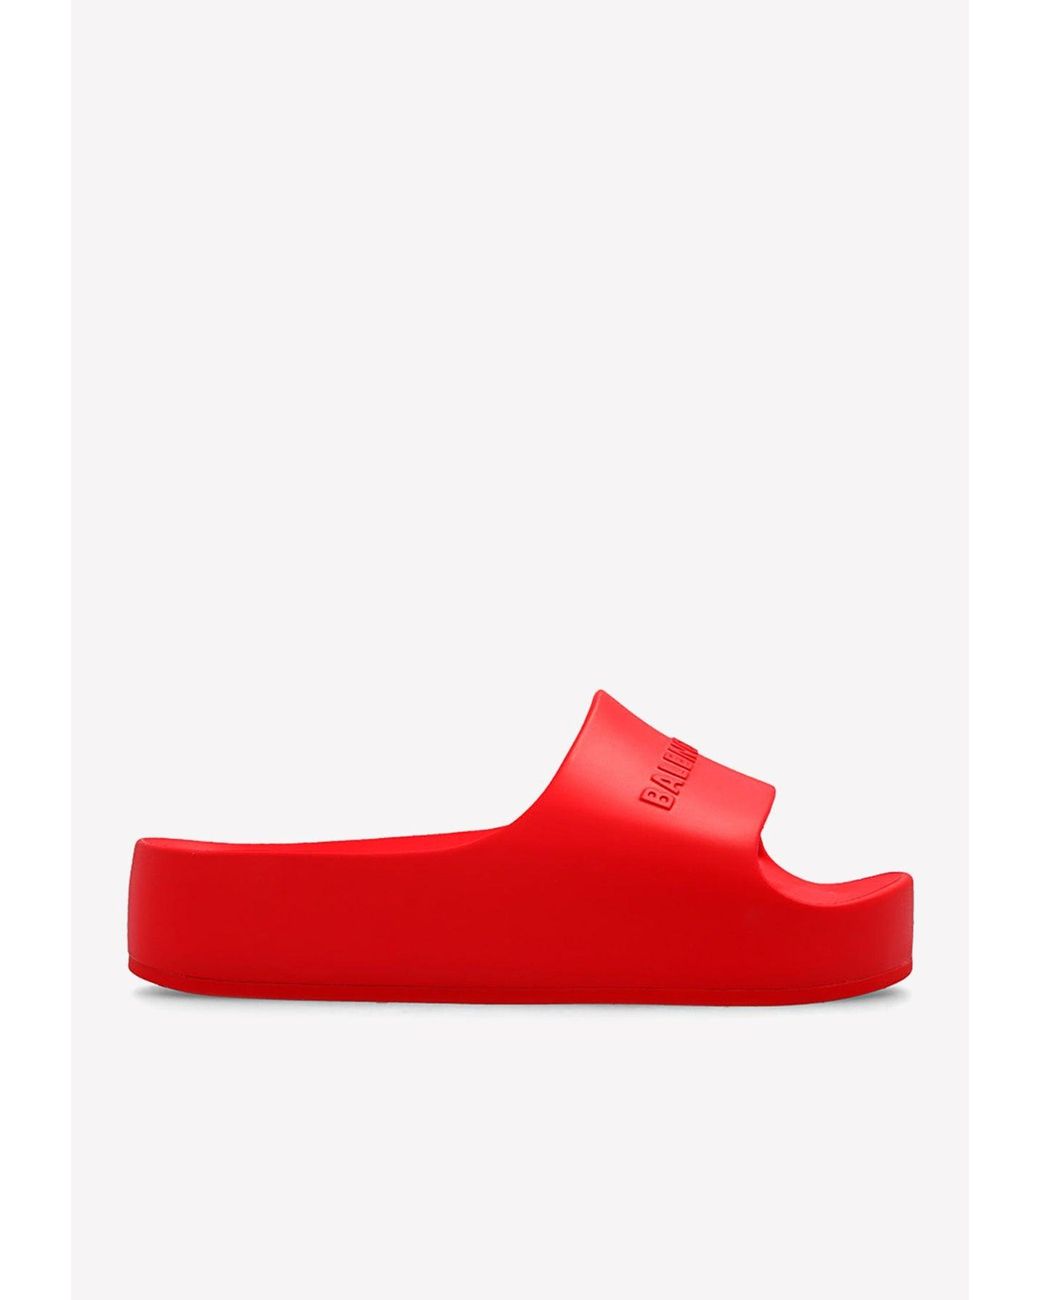 Balenciaga Chunky Rubber Flatform Slides in Red | Lyst